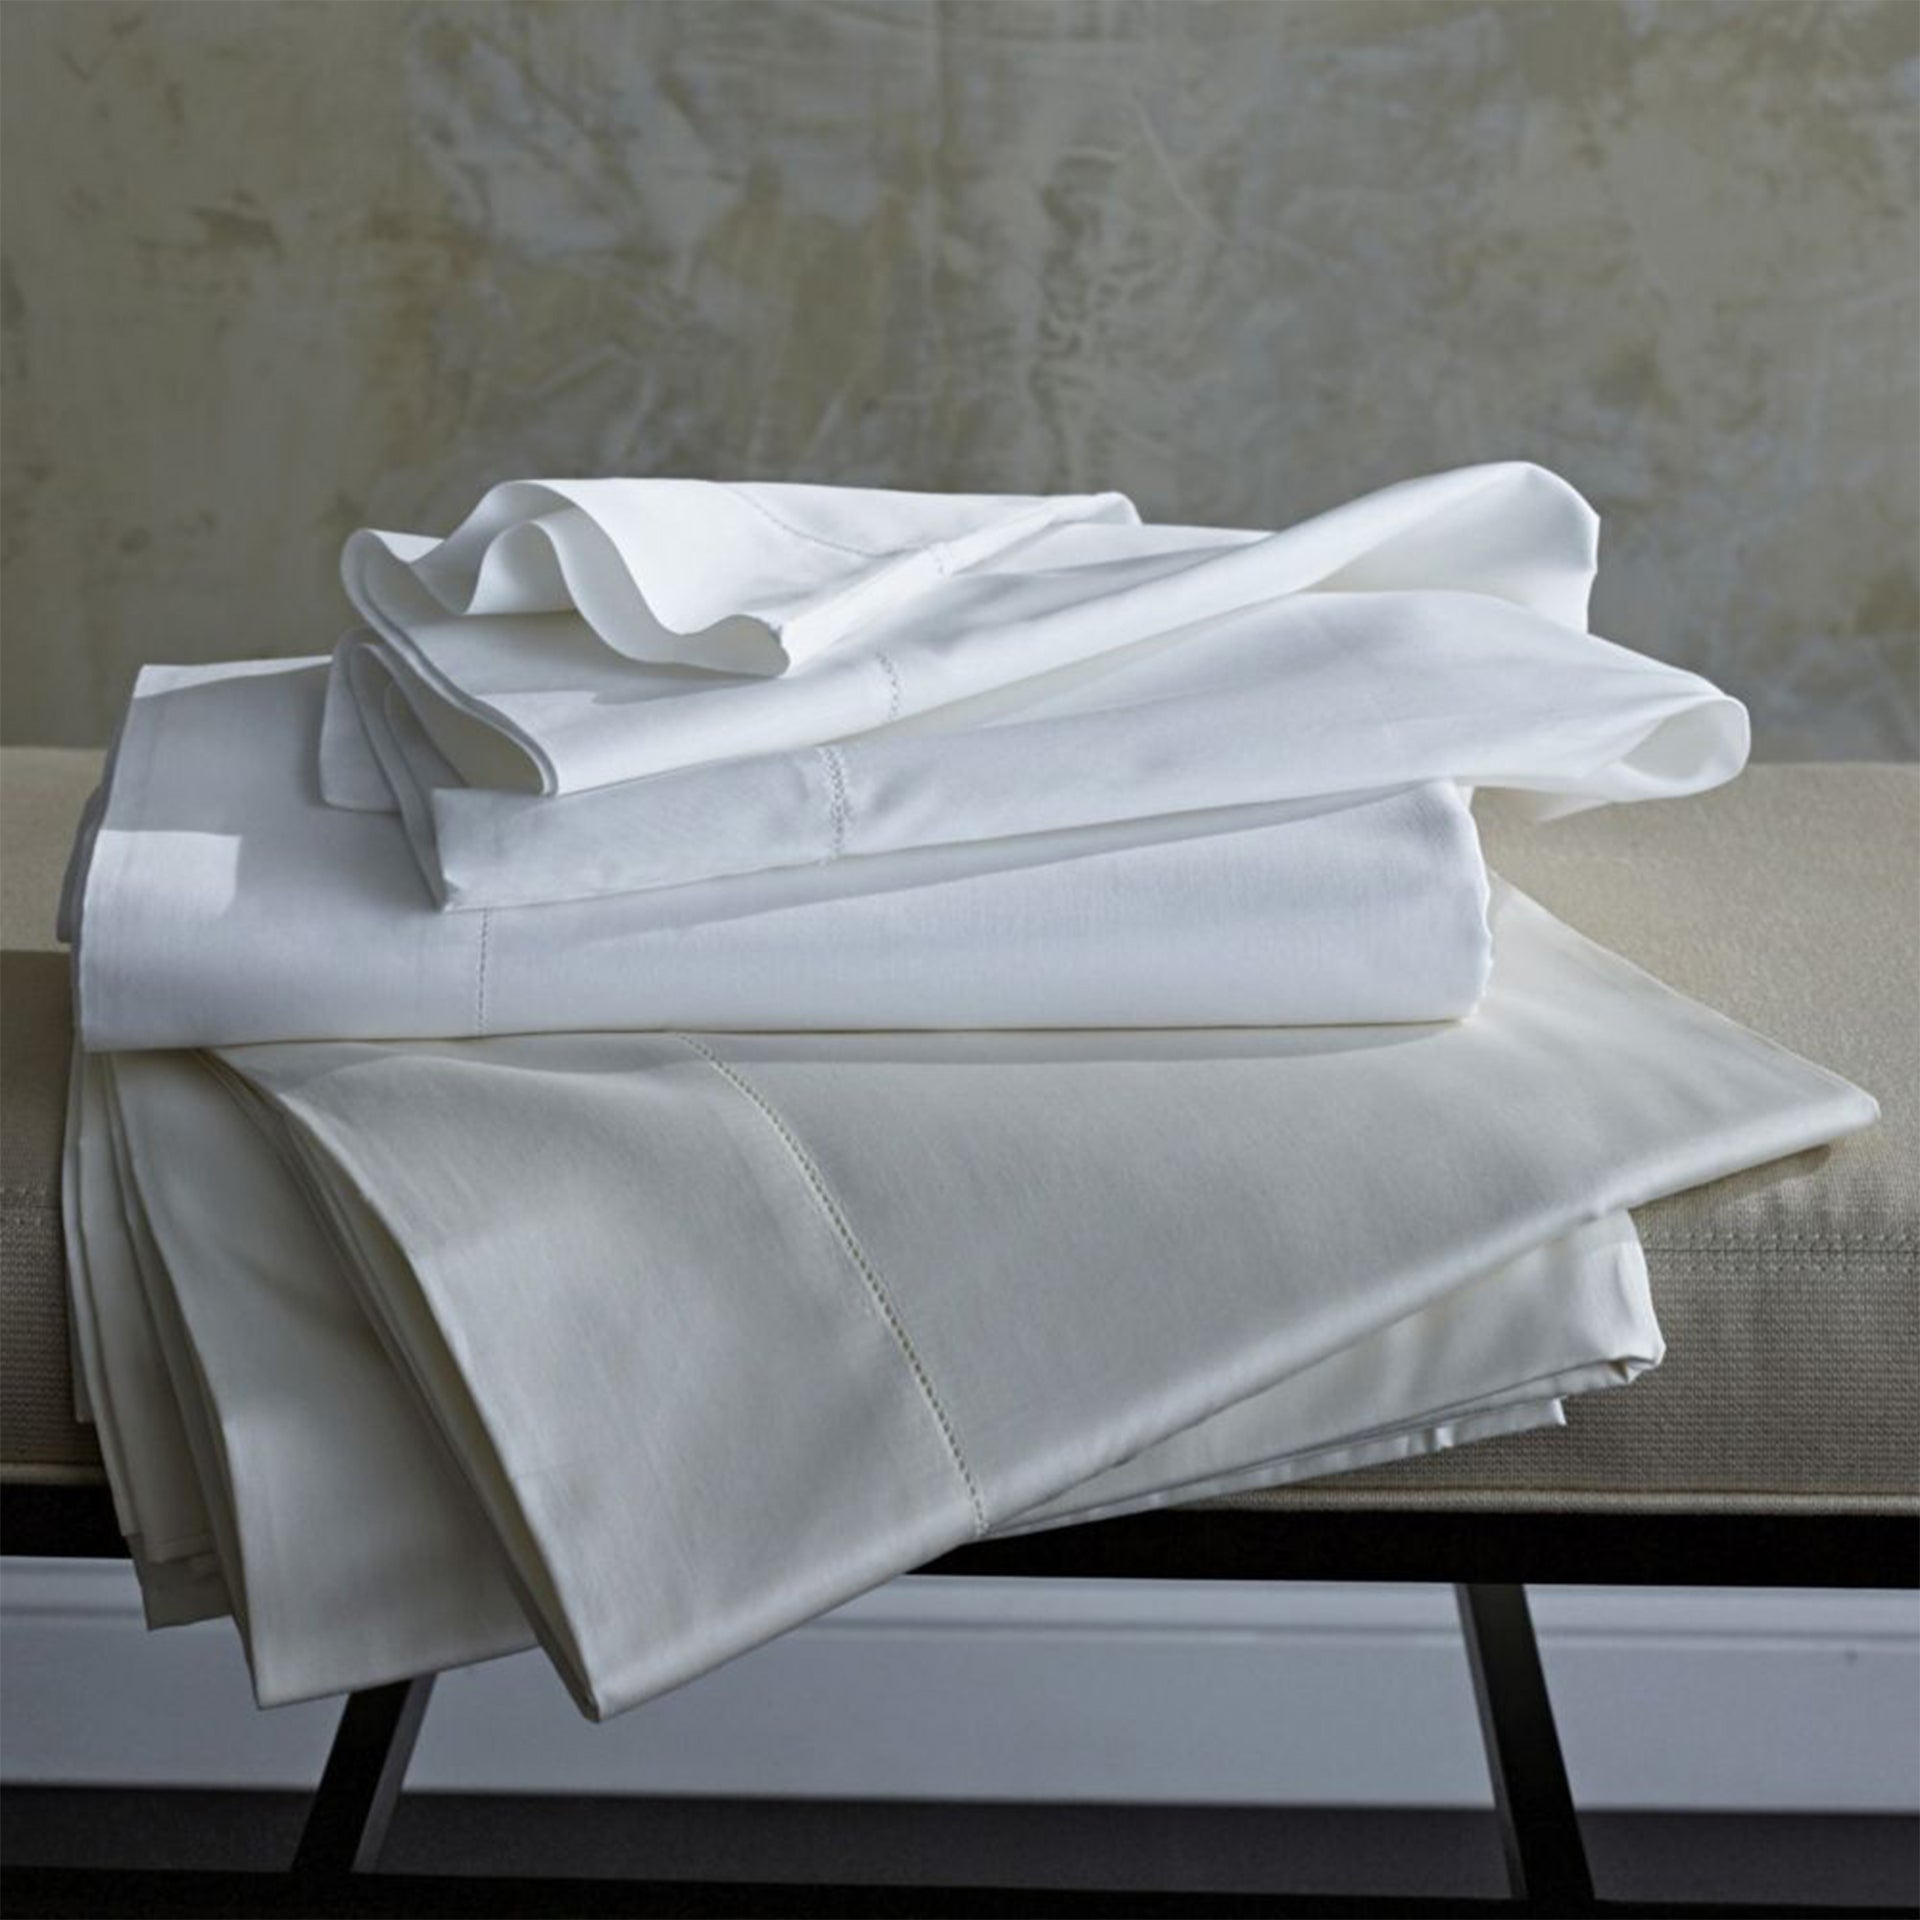 Fitted sheet offered in two classic colors-white and ivory. 